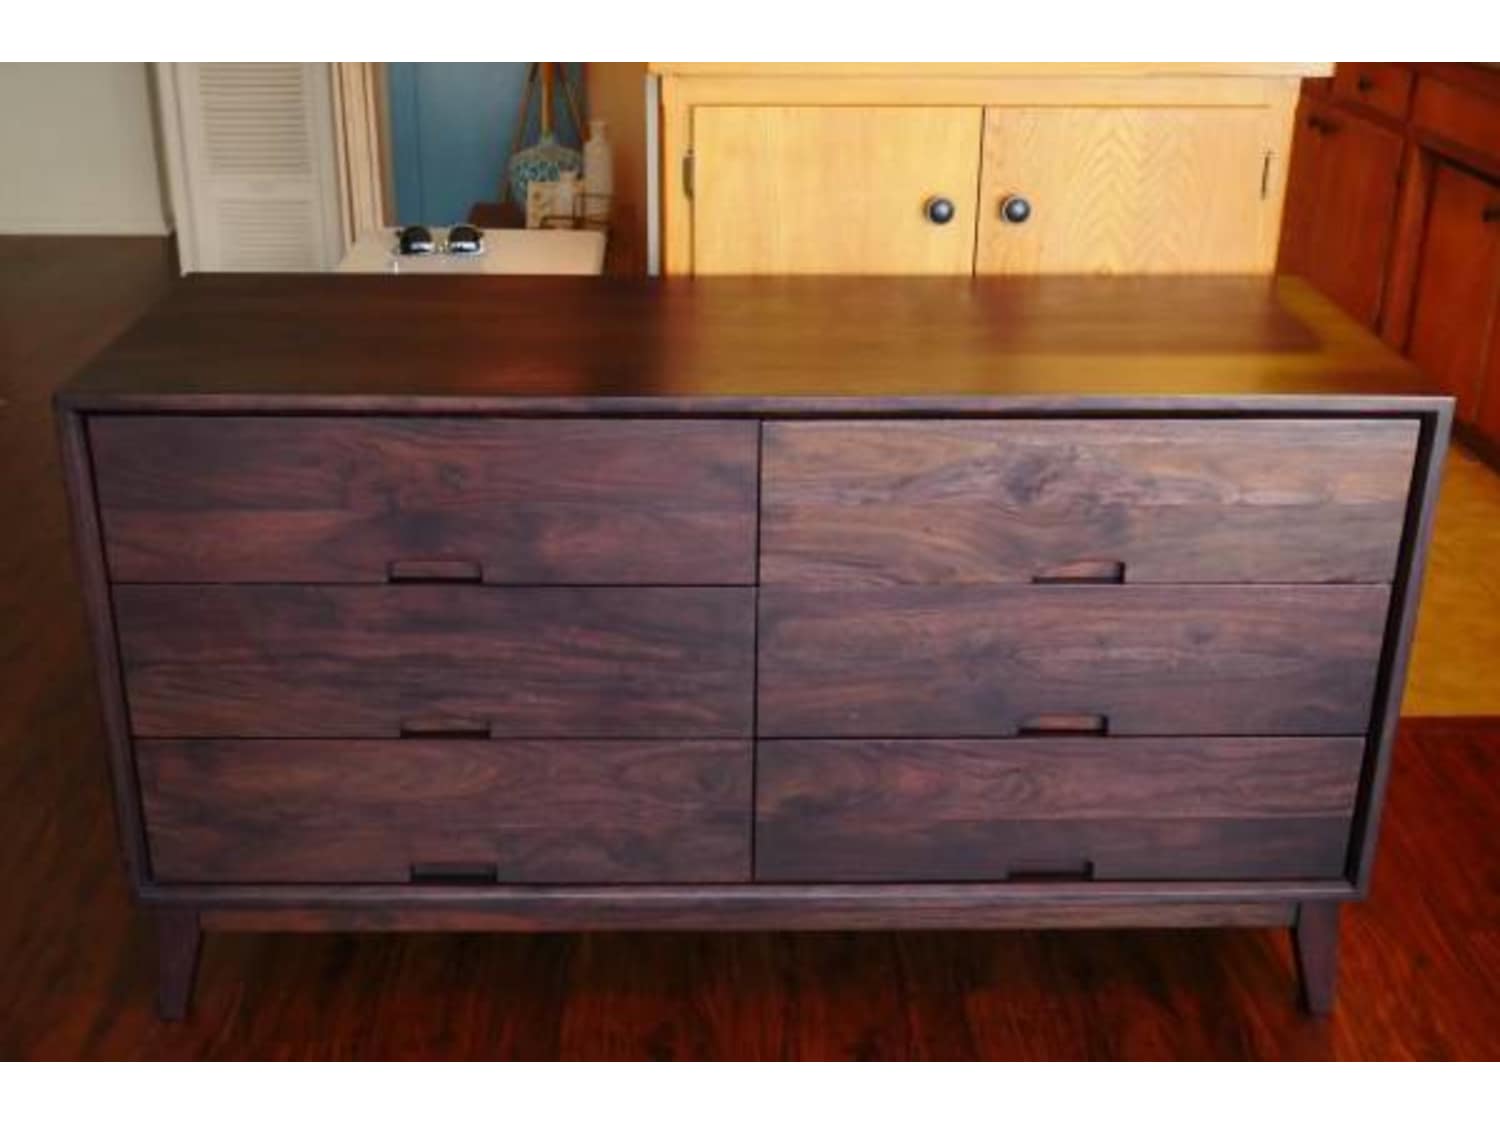 Crate Barrel Steppe 6 Drawer Dresser Apartment Therapy S Bazaar